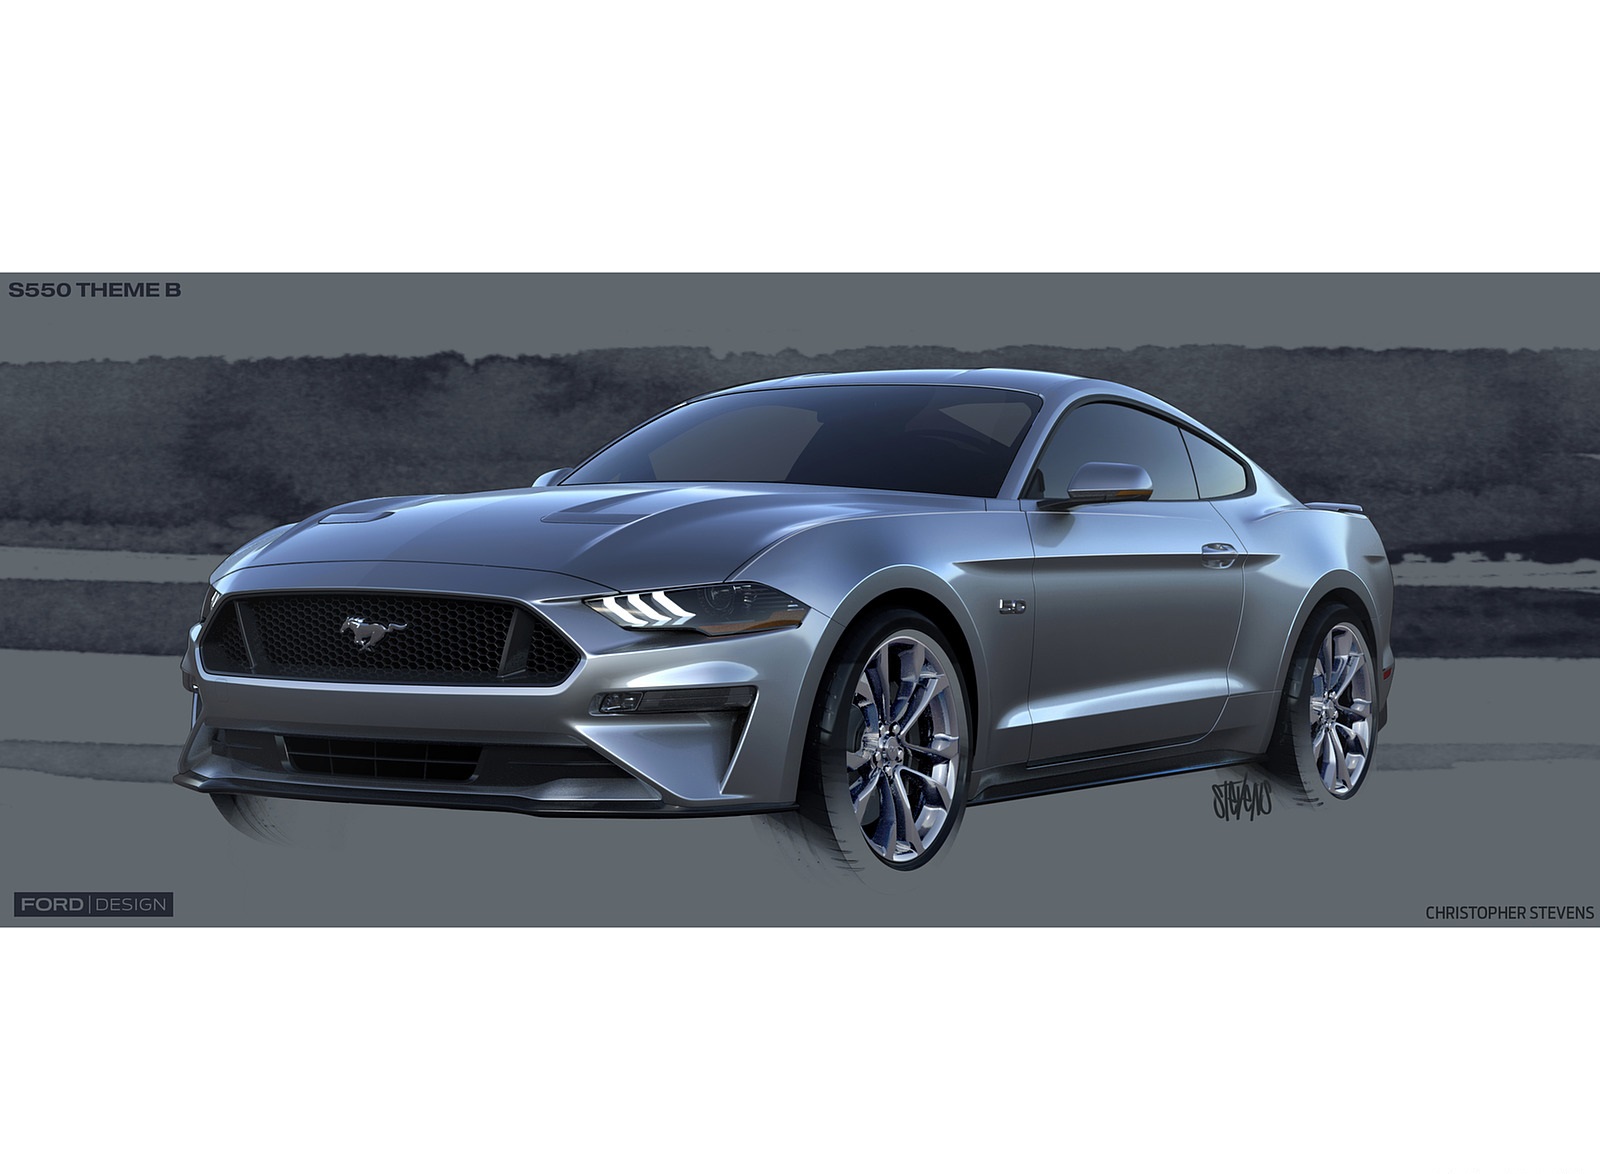 2018 Ford Mustang V8 GT Design Sketch Wallpapers #16 of 25